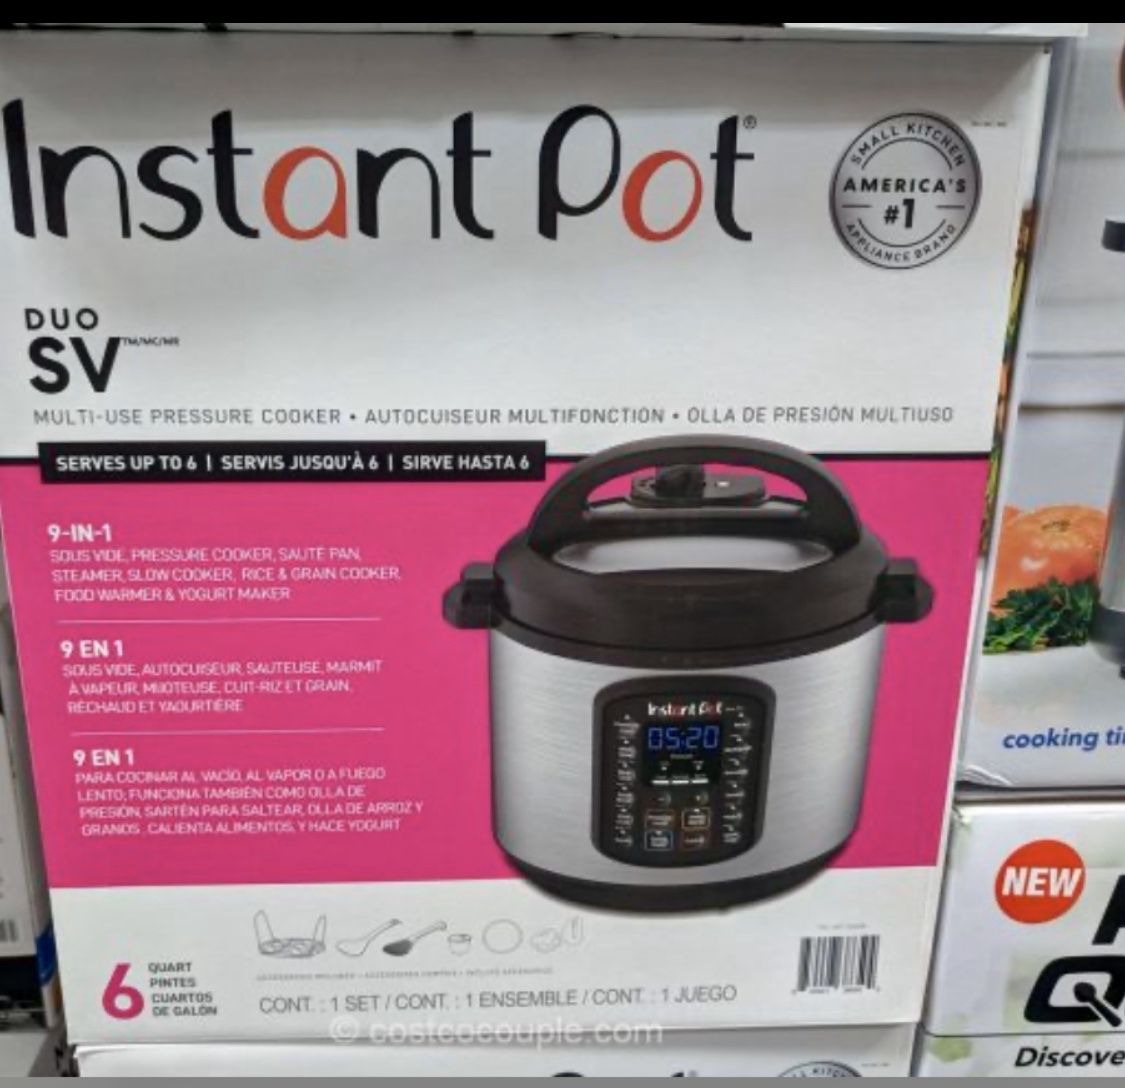 Instant pot: Brand new IN BOX, NEVER OPENED